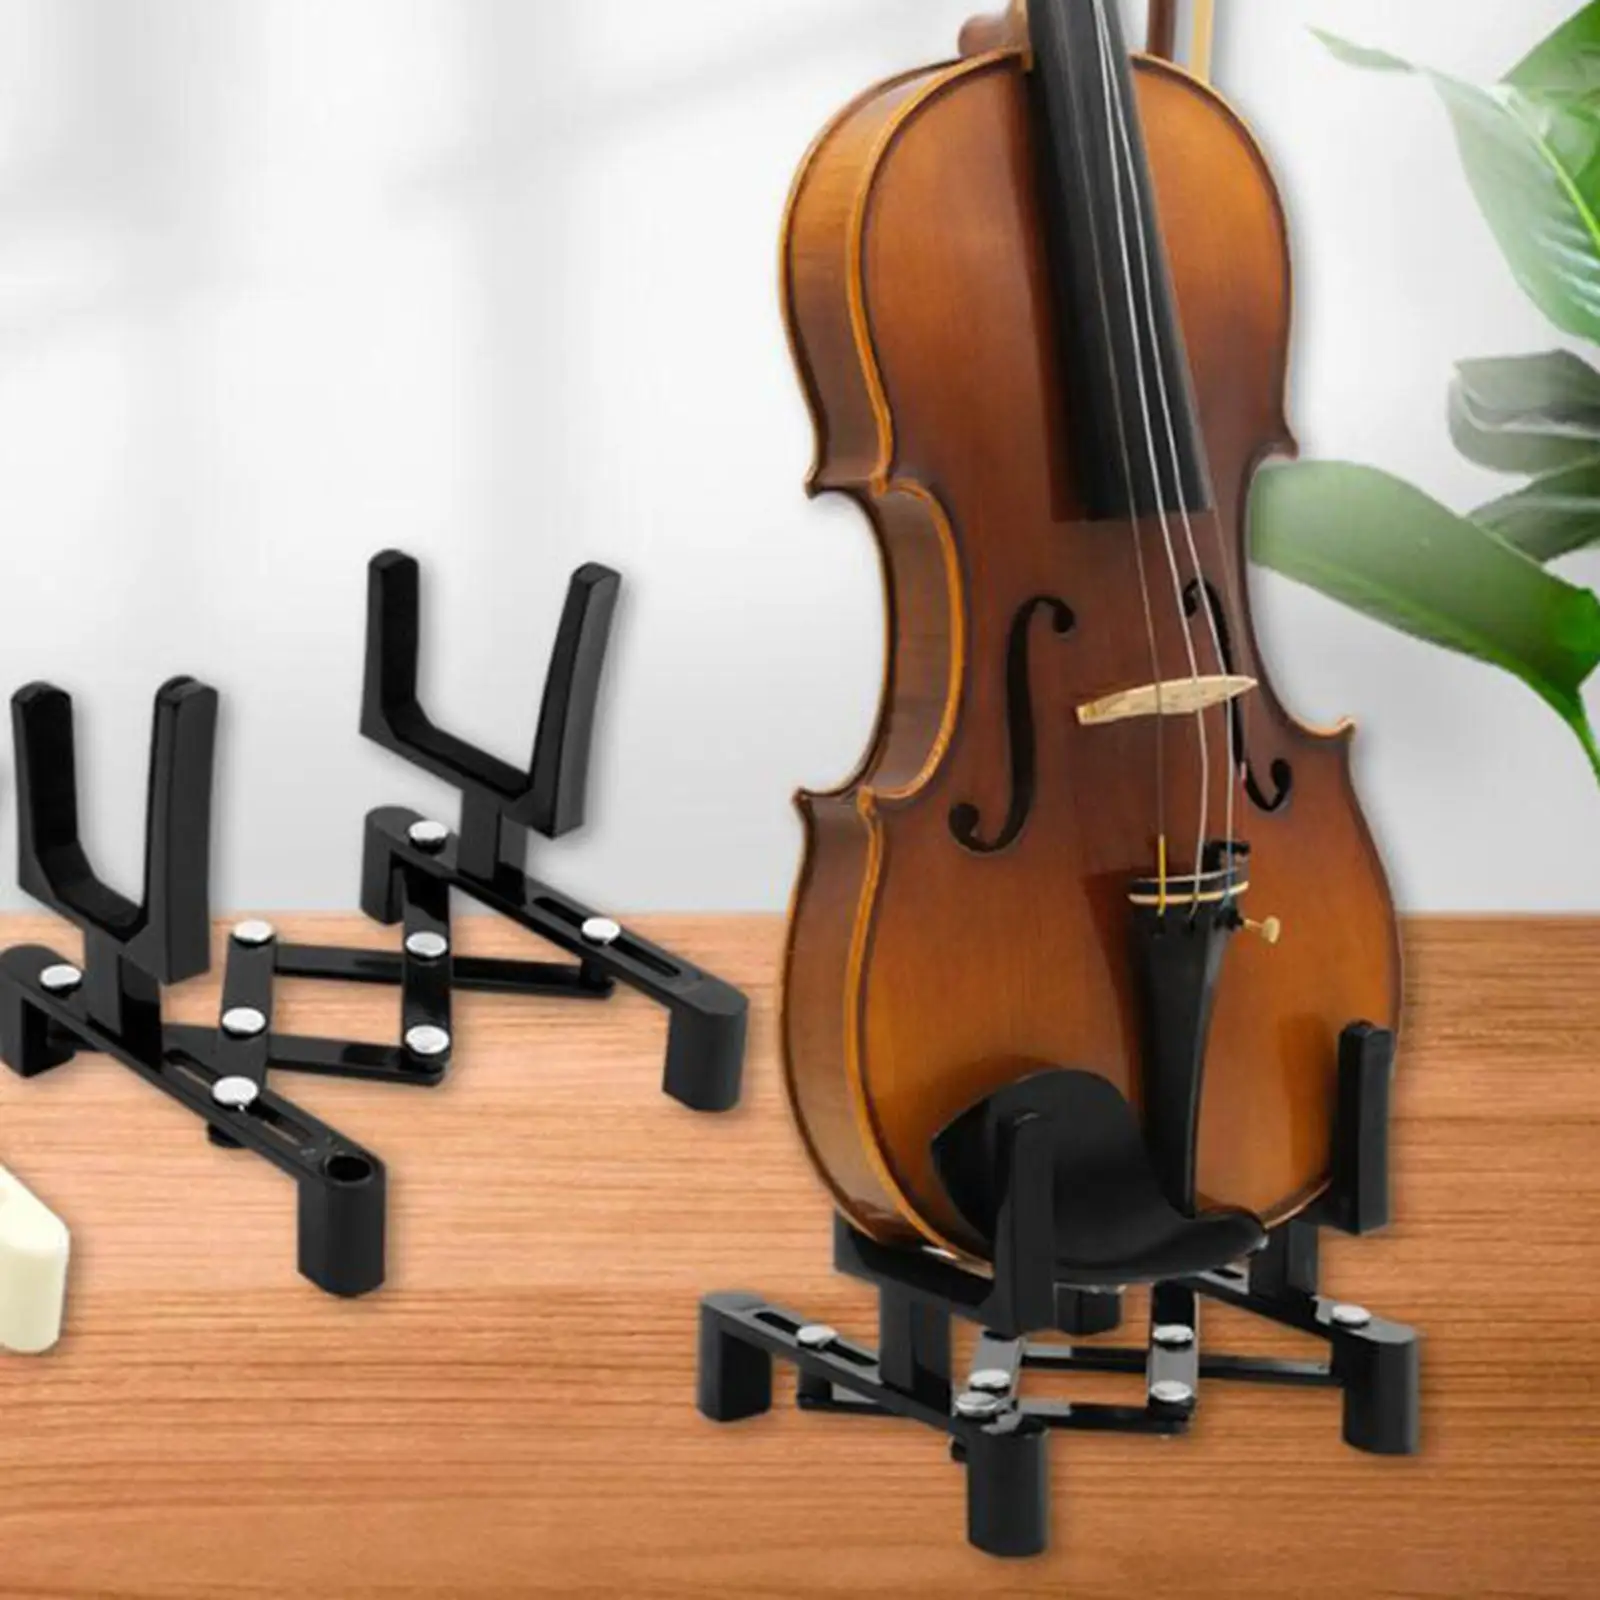 Foldable Violin Stand, Lightweight and Portable, Violin Holder, with Padded Foam, Floor Stand Folding  Holder.